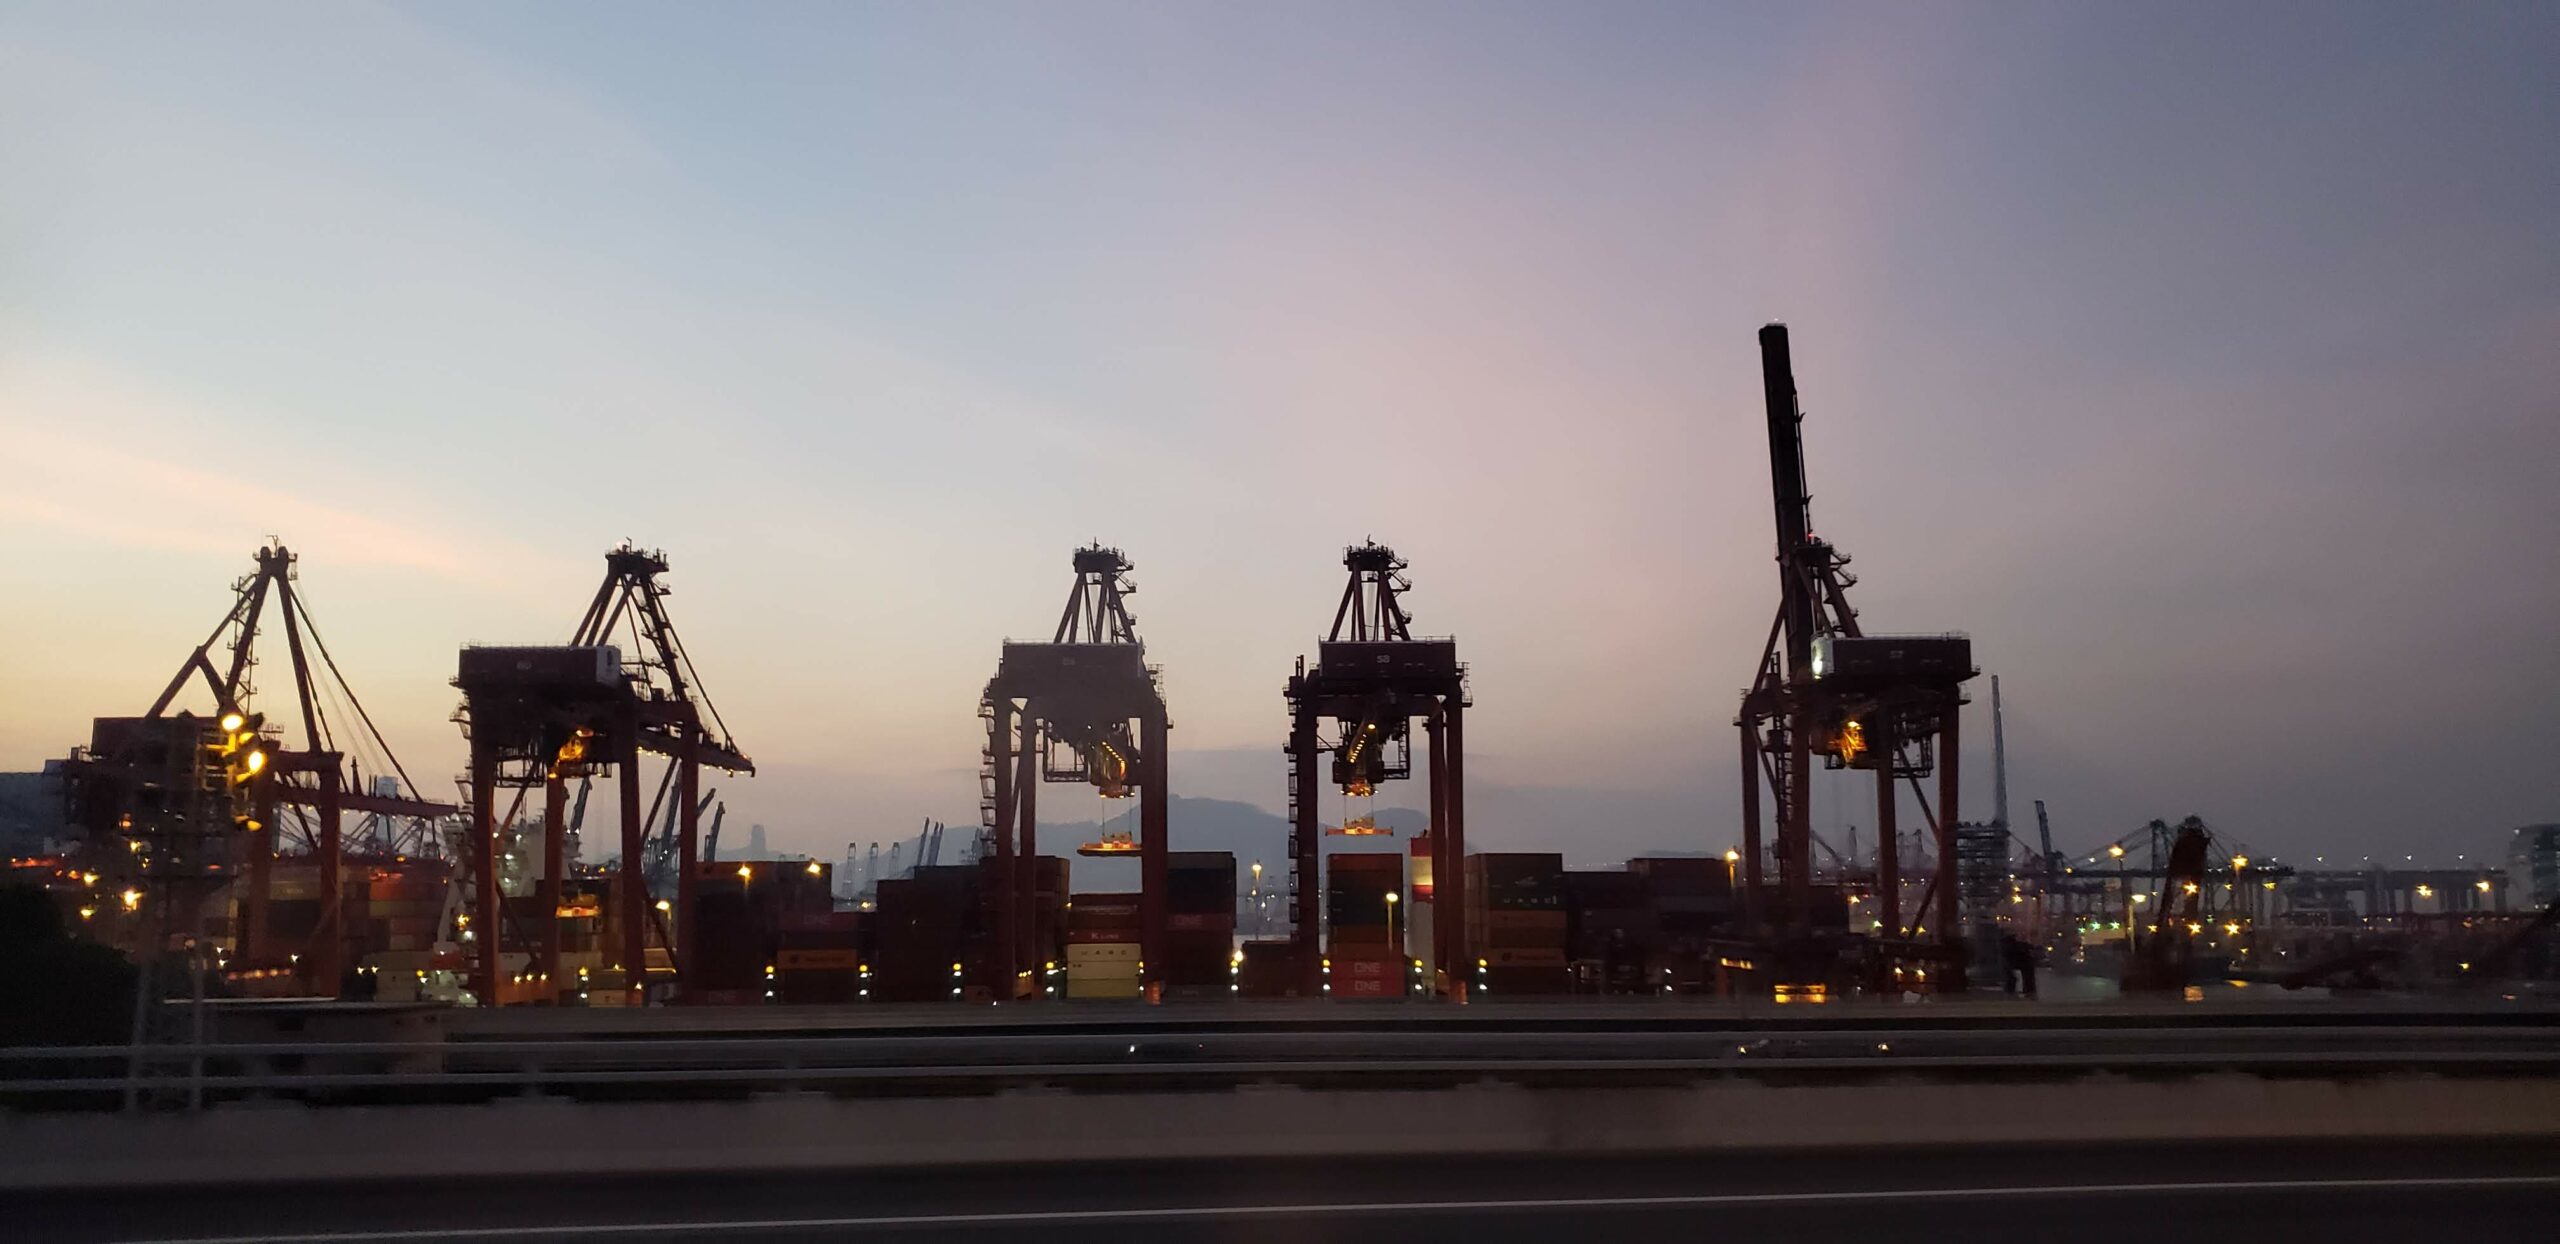 silhouettes of cranes in the port of Hong Kong